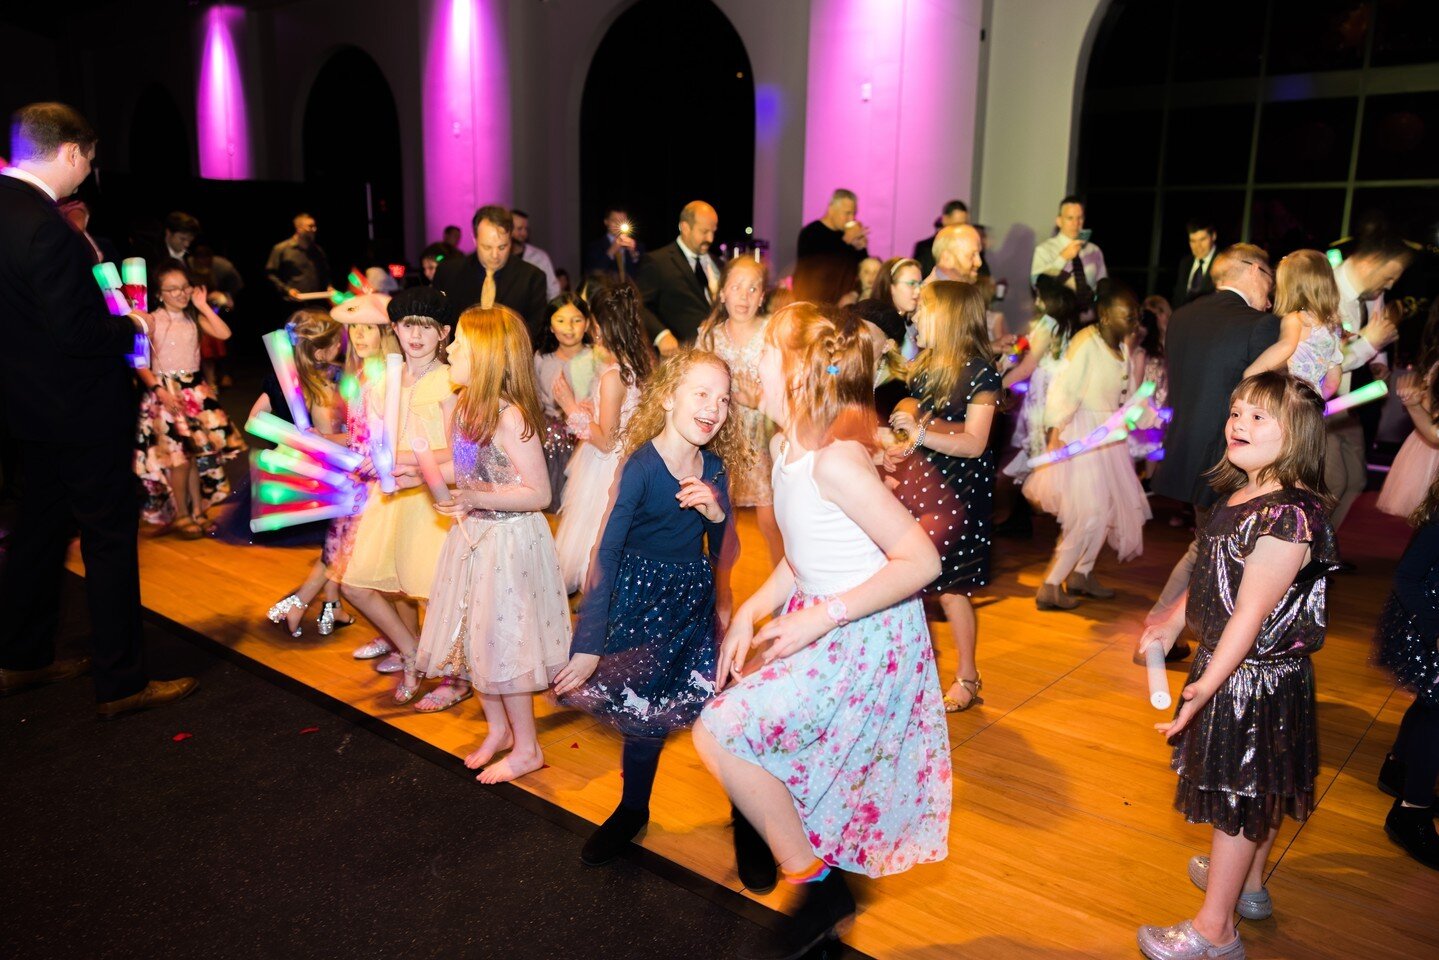 // DADDY-DAUGHTER NIGHT //

Last Friday, dads, uncles, and father-figures gathered together with their daughters for A Night in Paris &ndash; sharing a special dinner, dancing and taking fun photos.

It's here that every daughter felt loved by  the d